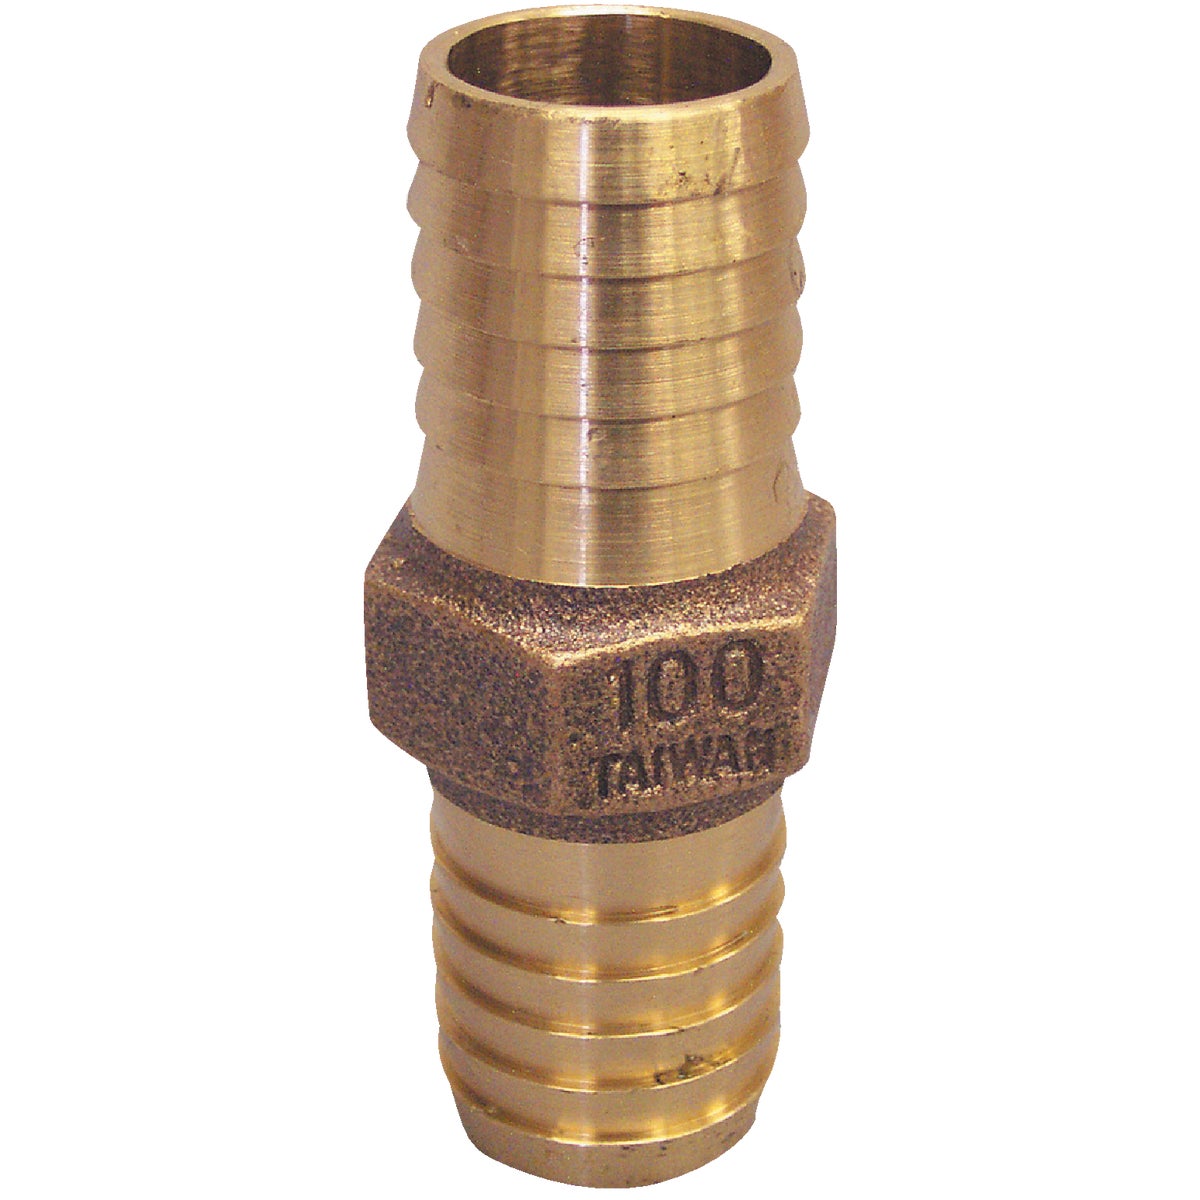 Item 400914, Heavy-duty red brass coupling with hex shoulder, for use with polyethylene 